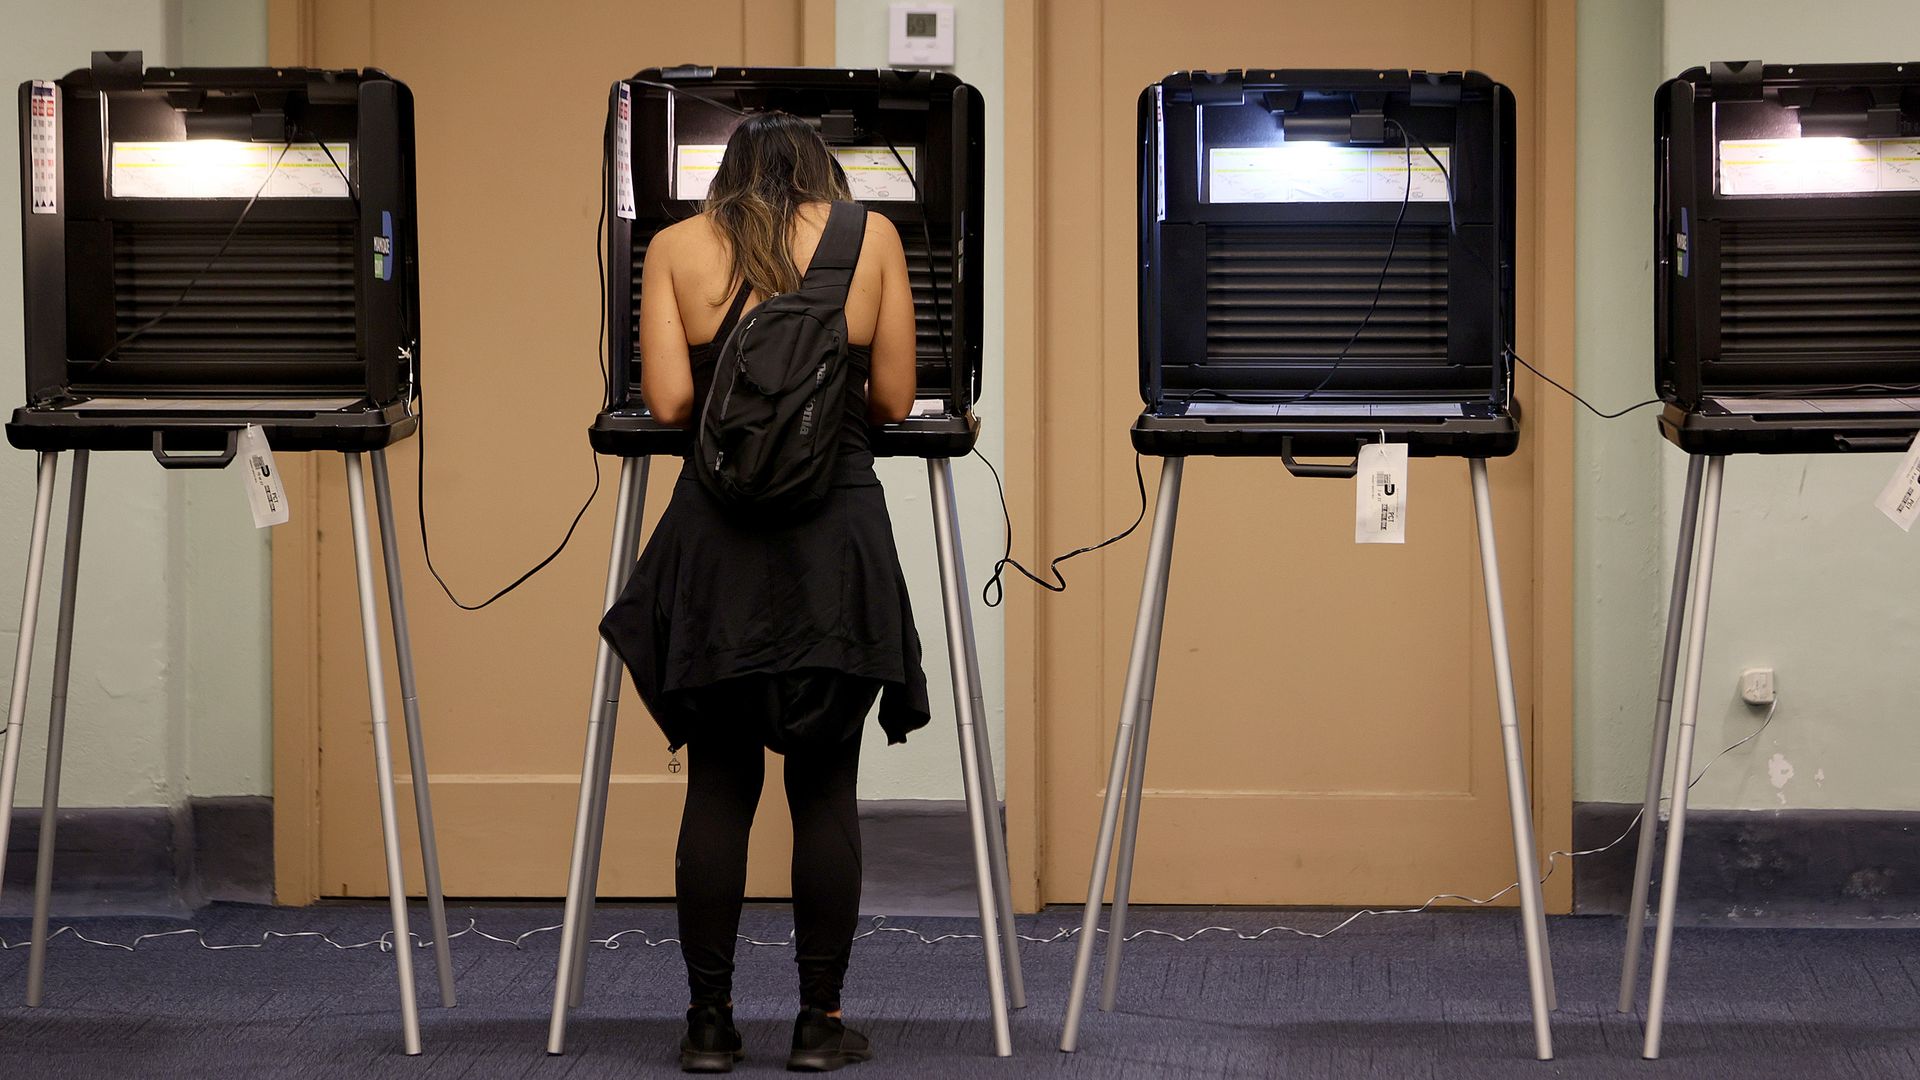 A voter fills out an election ballot at a polling station in Miami, Florida, in 2021.